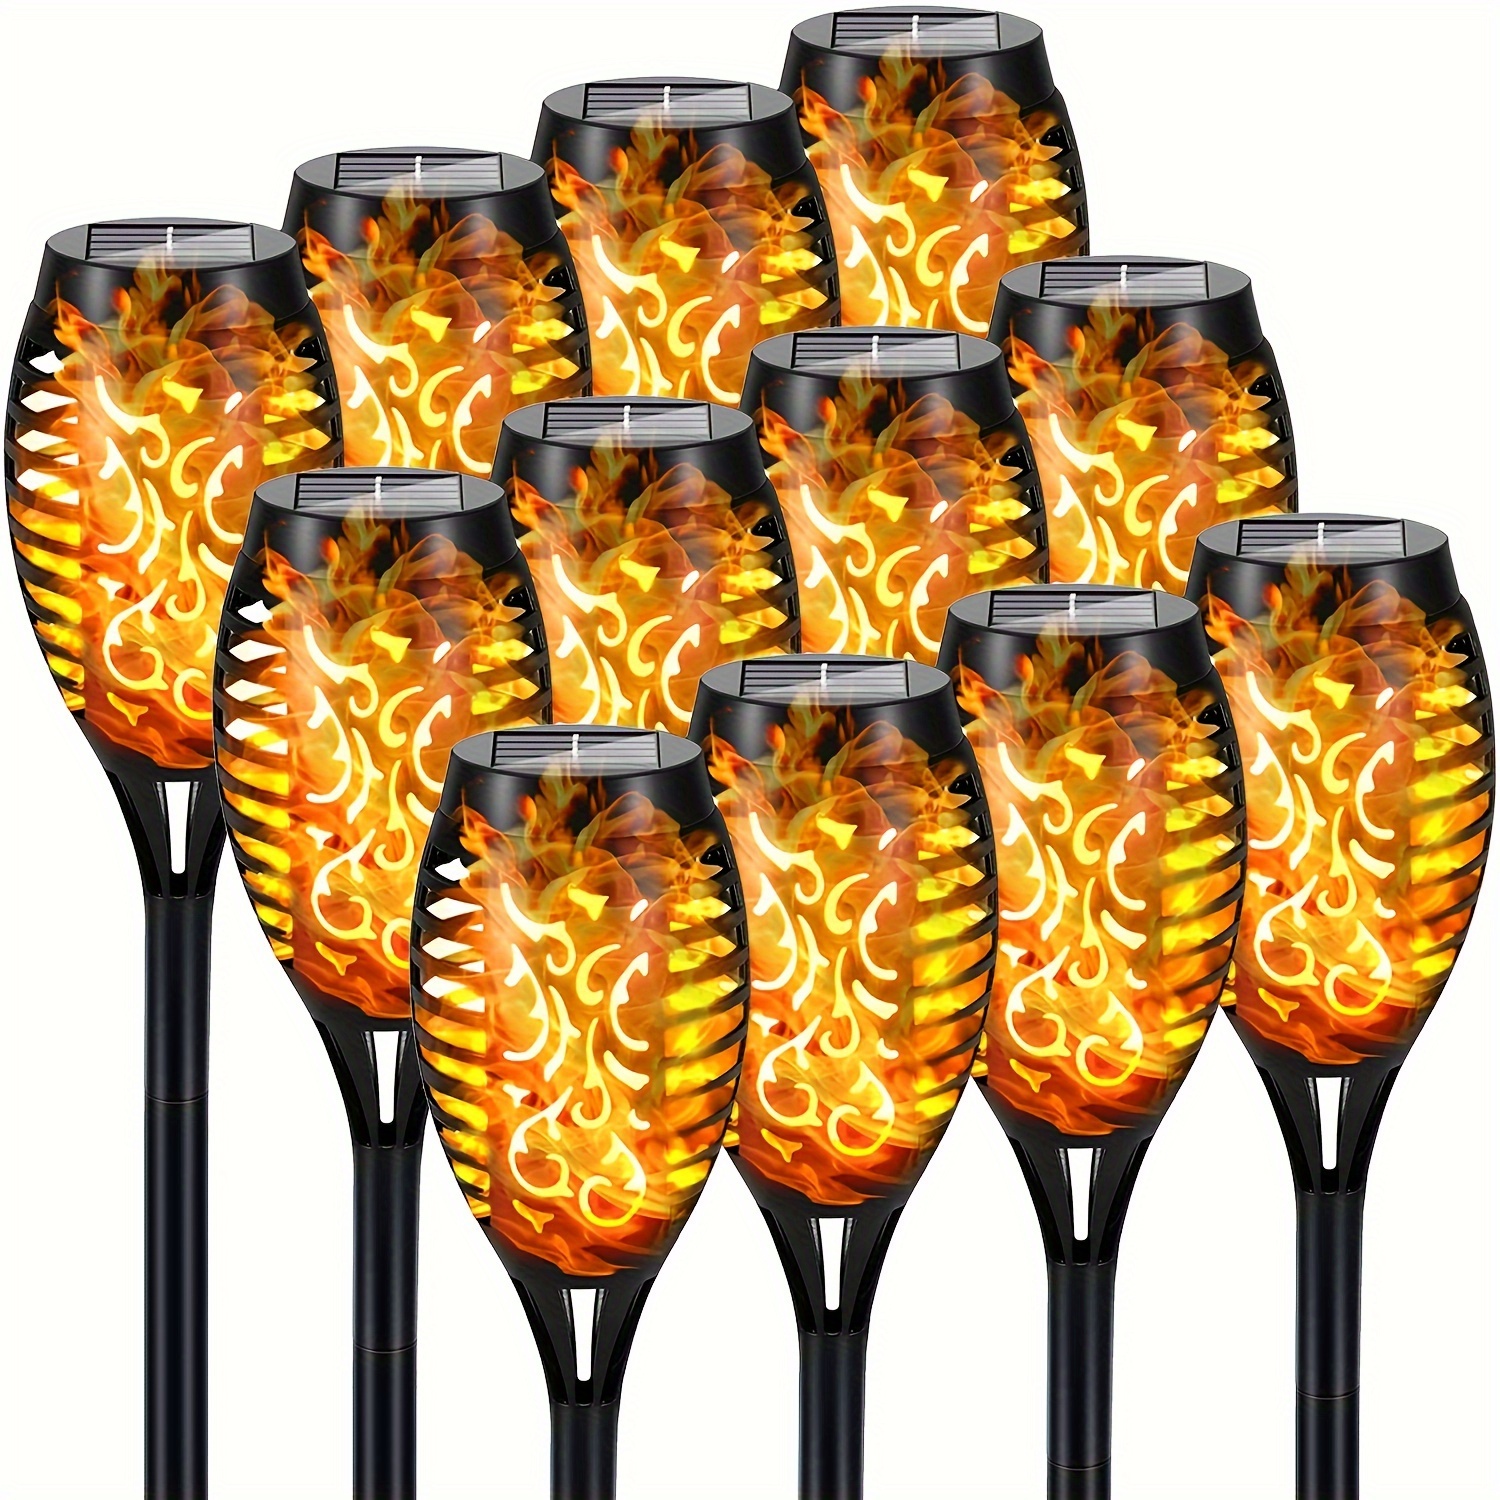 

4-piece Solar Flame Lights With Flickering Effect - Perfect For Outdoor Pathways, Lawns & Villa Landscaping